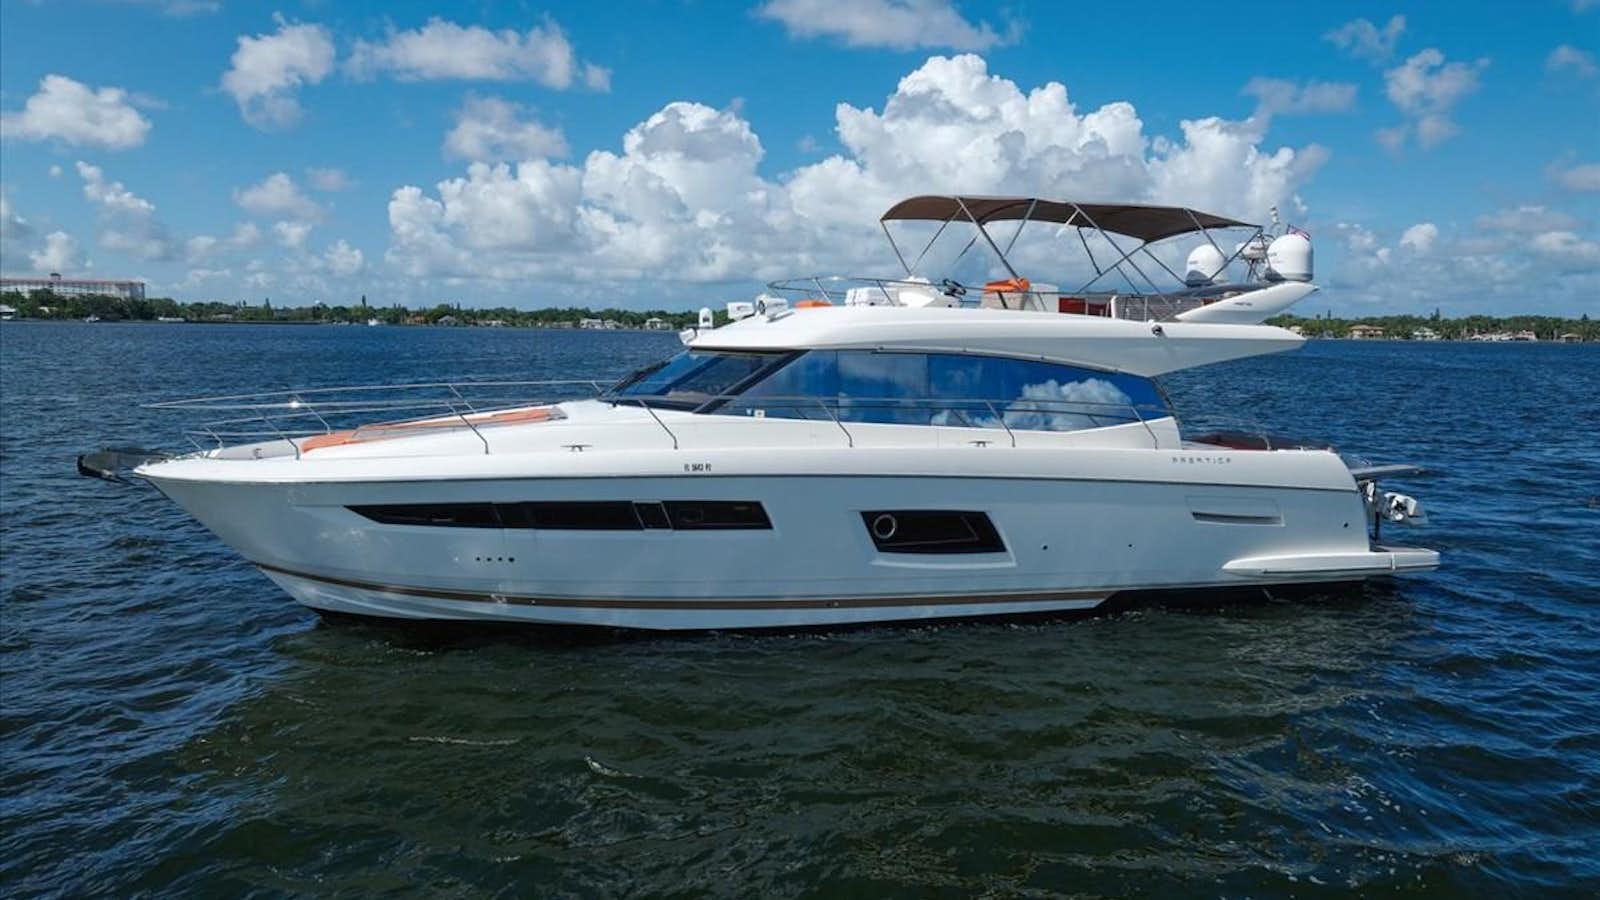 2015 prestige 550 fly
Yacht for Sale